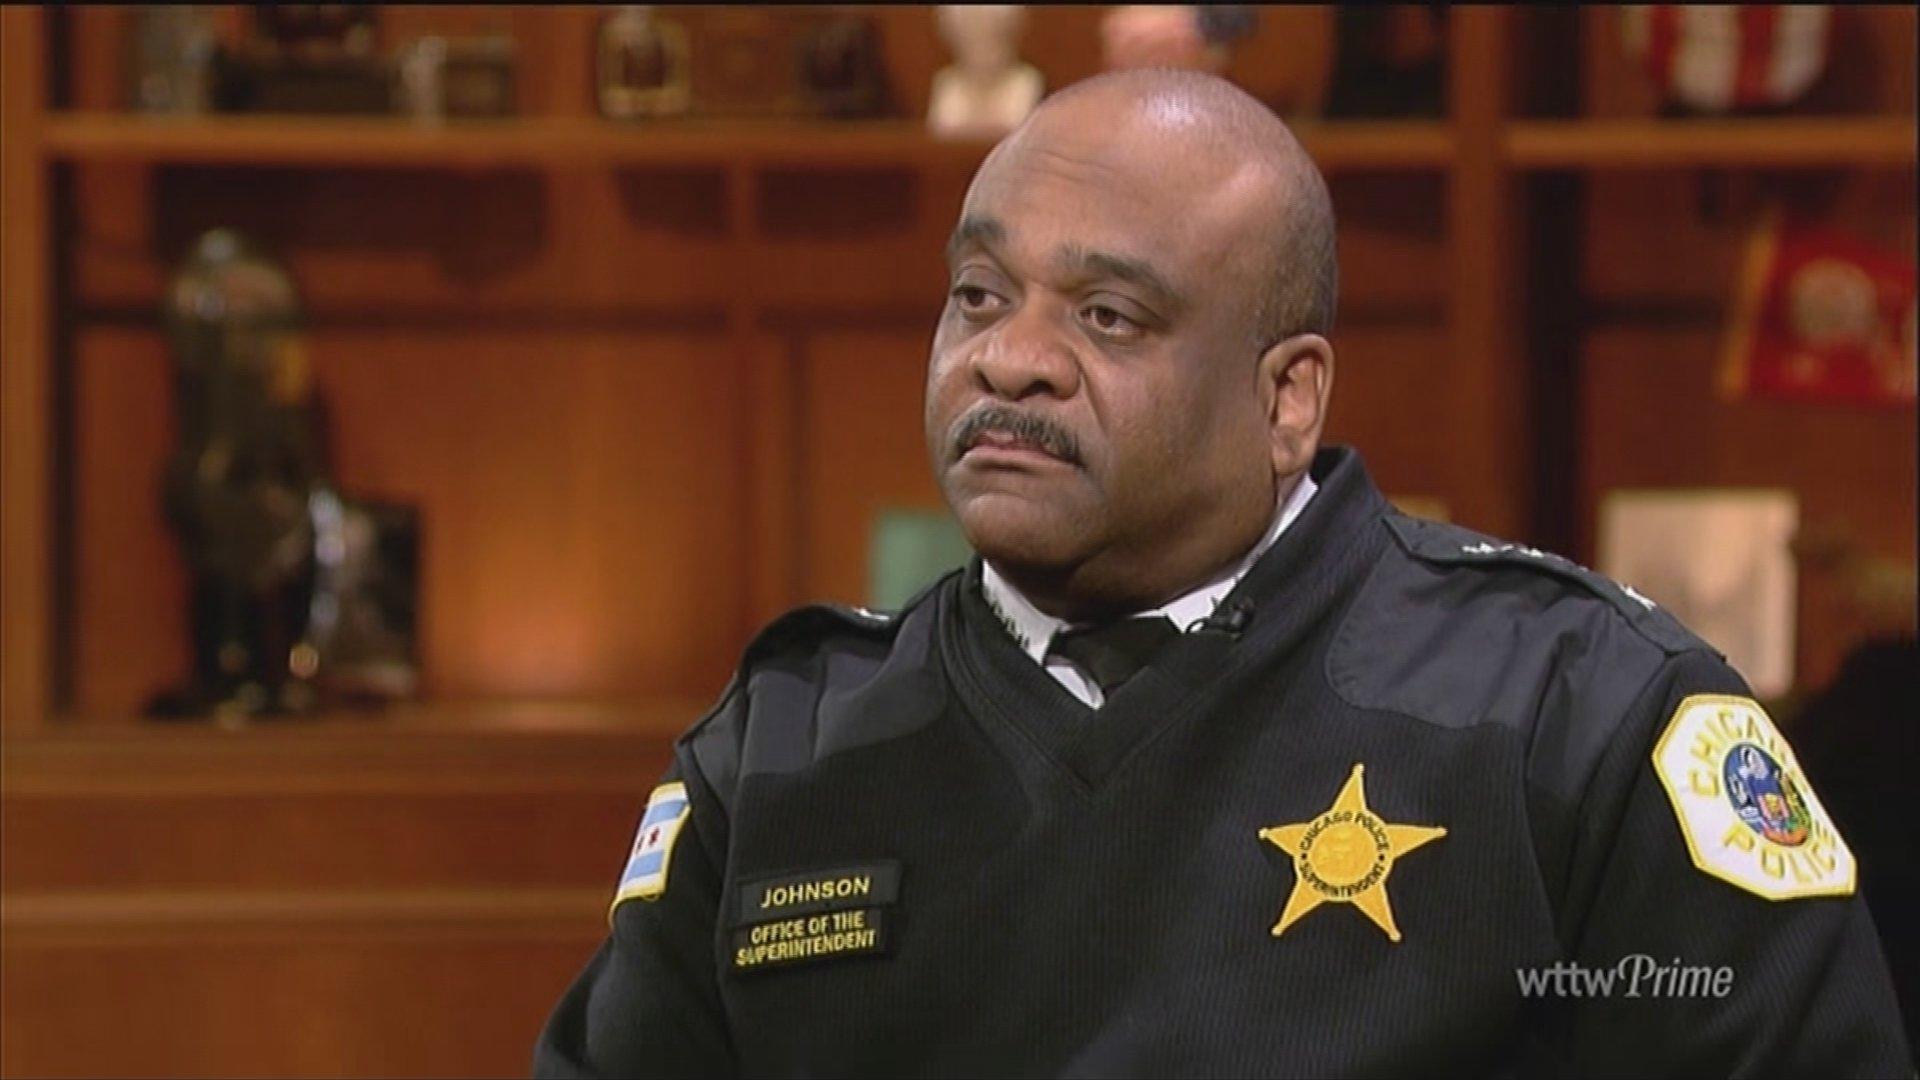 Chicago police Superintendent Eddie Johnson appears on “Chicago Tonight” on January 3, 2017. (WTTW News)